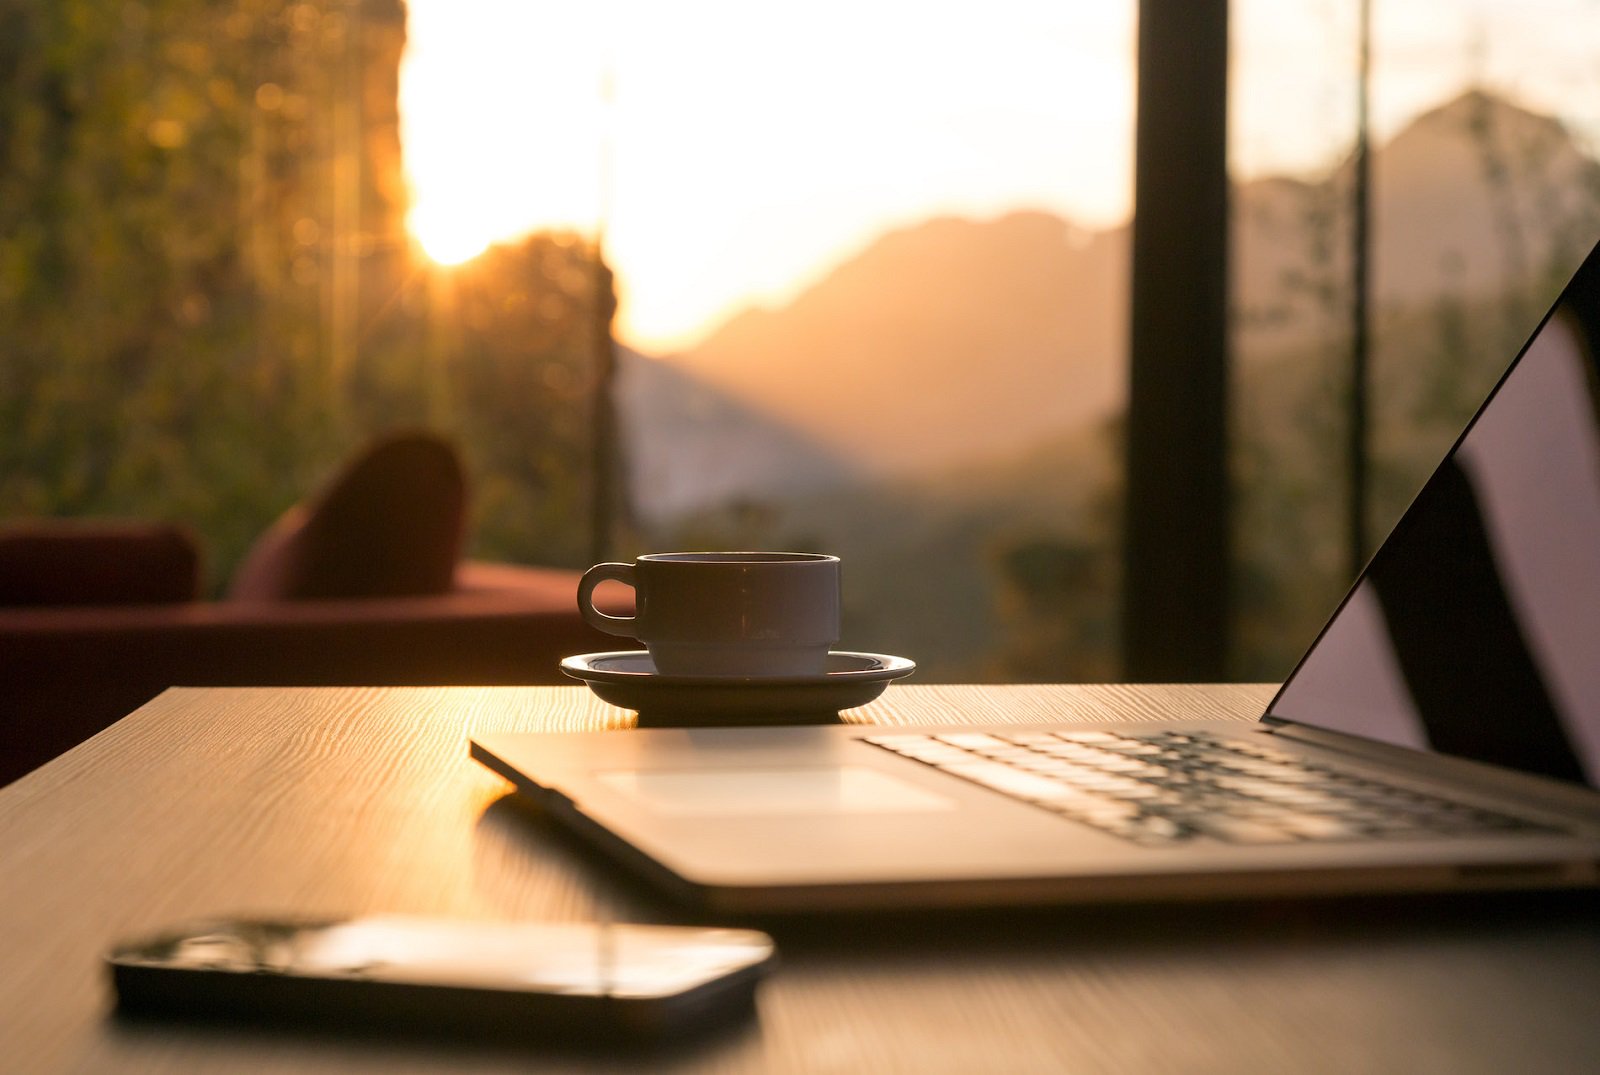 Laptop phone and mug of coffee in a sunset